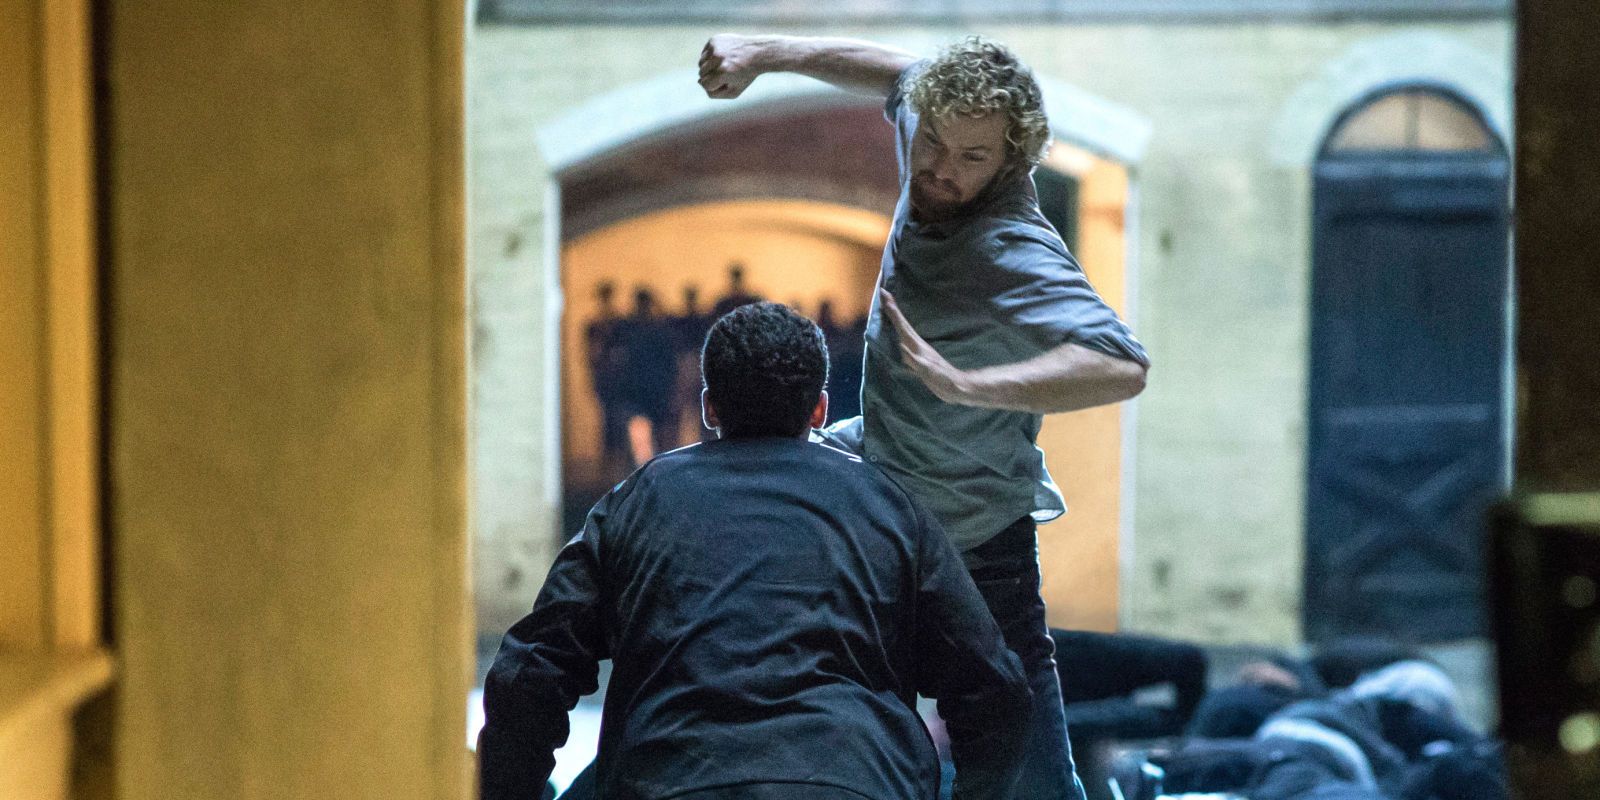 Iron Fist: Cast Reveal Funniest Moments BEHIND THE SCENES - (Video Clip)